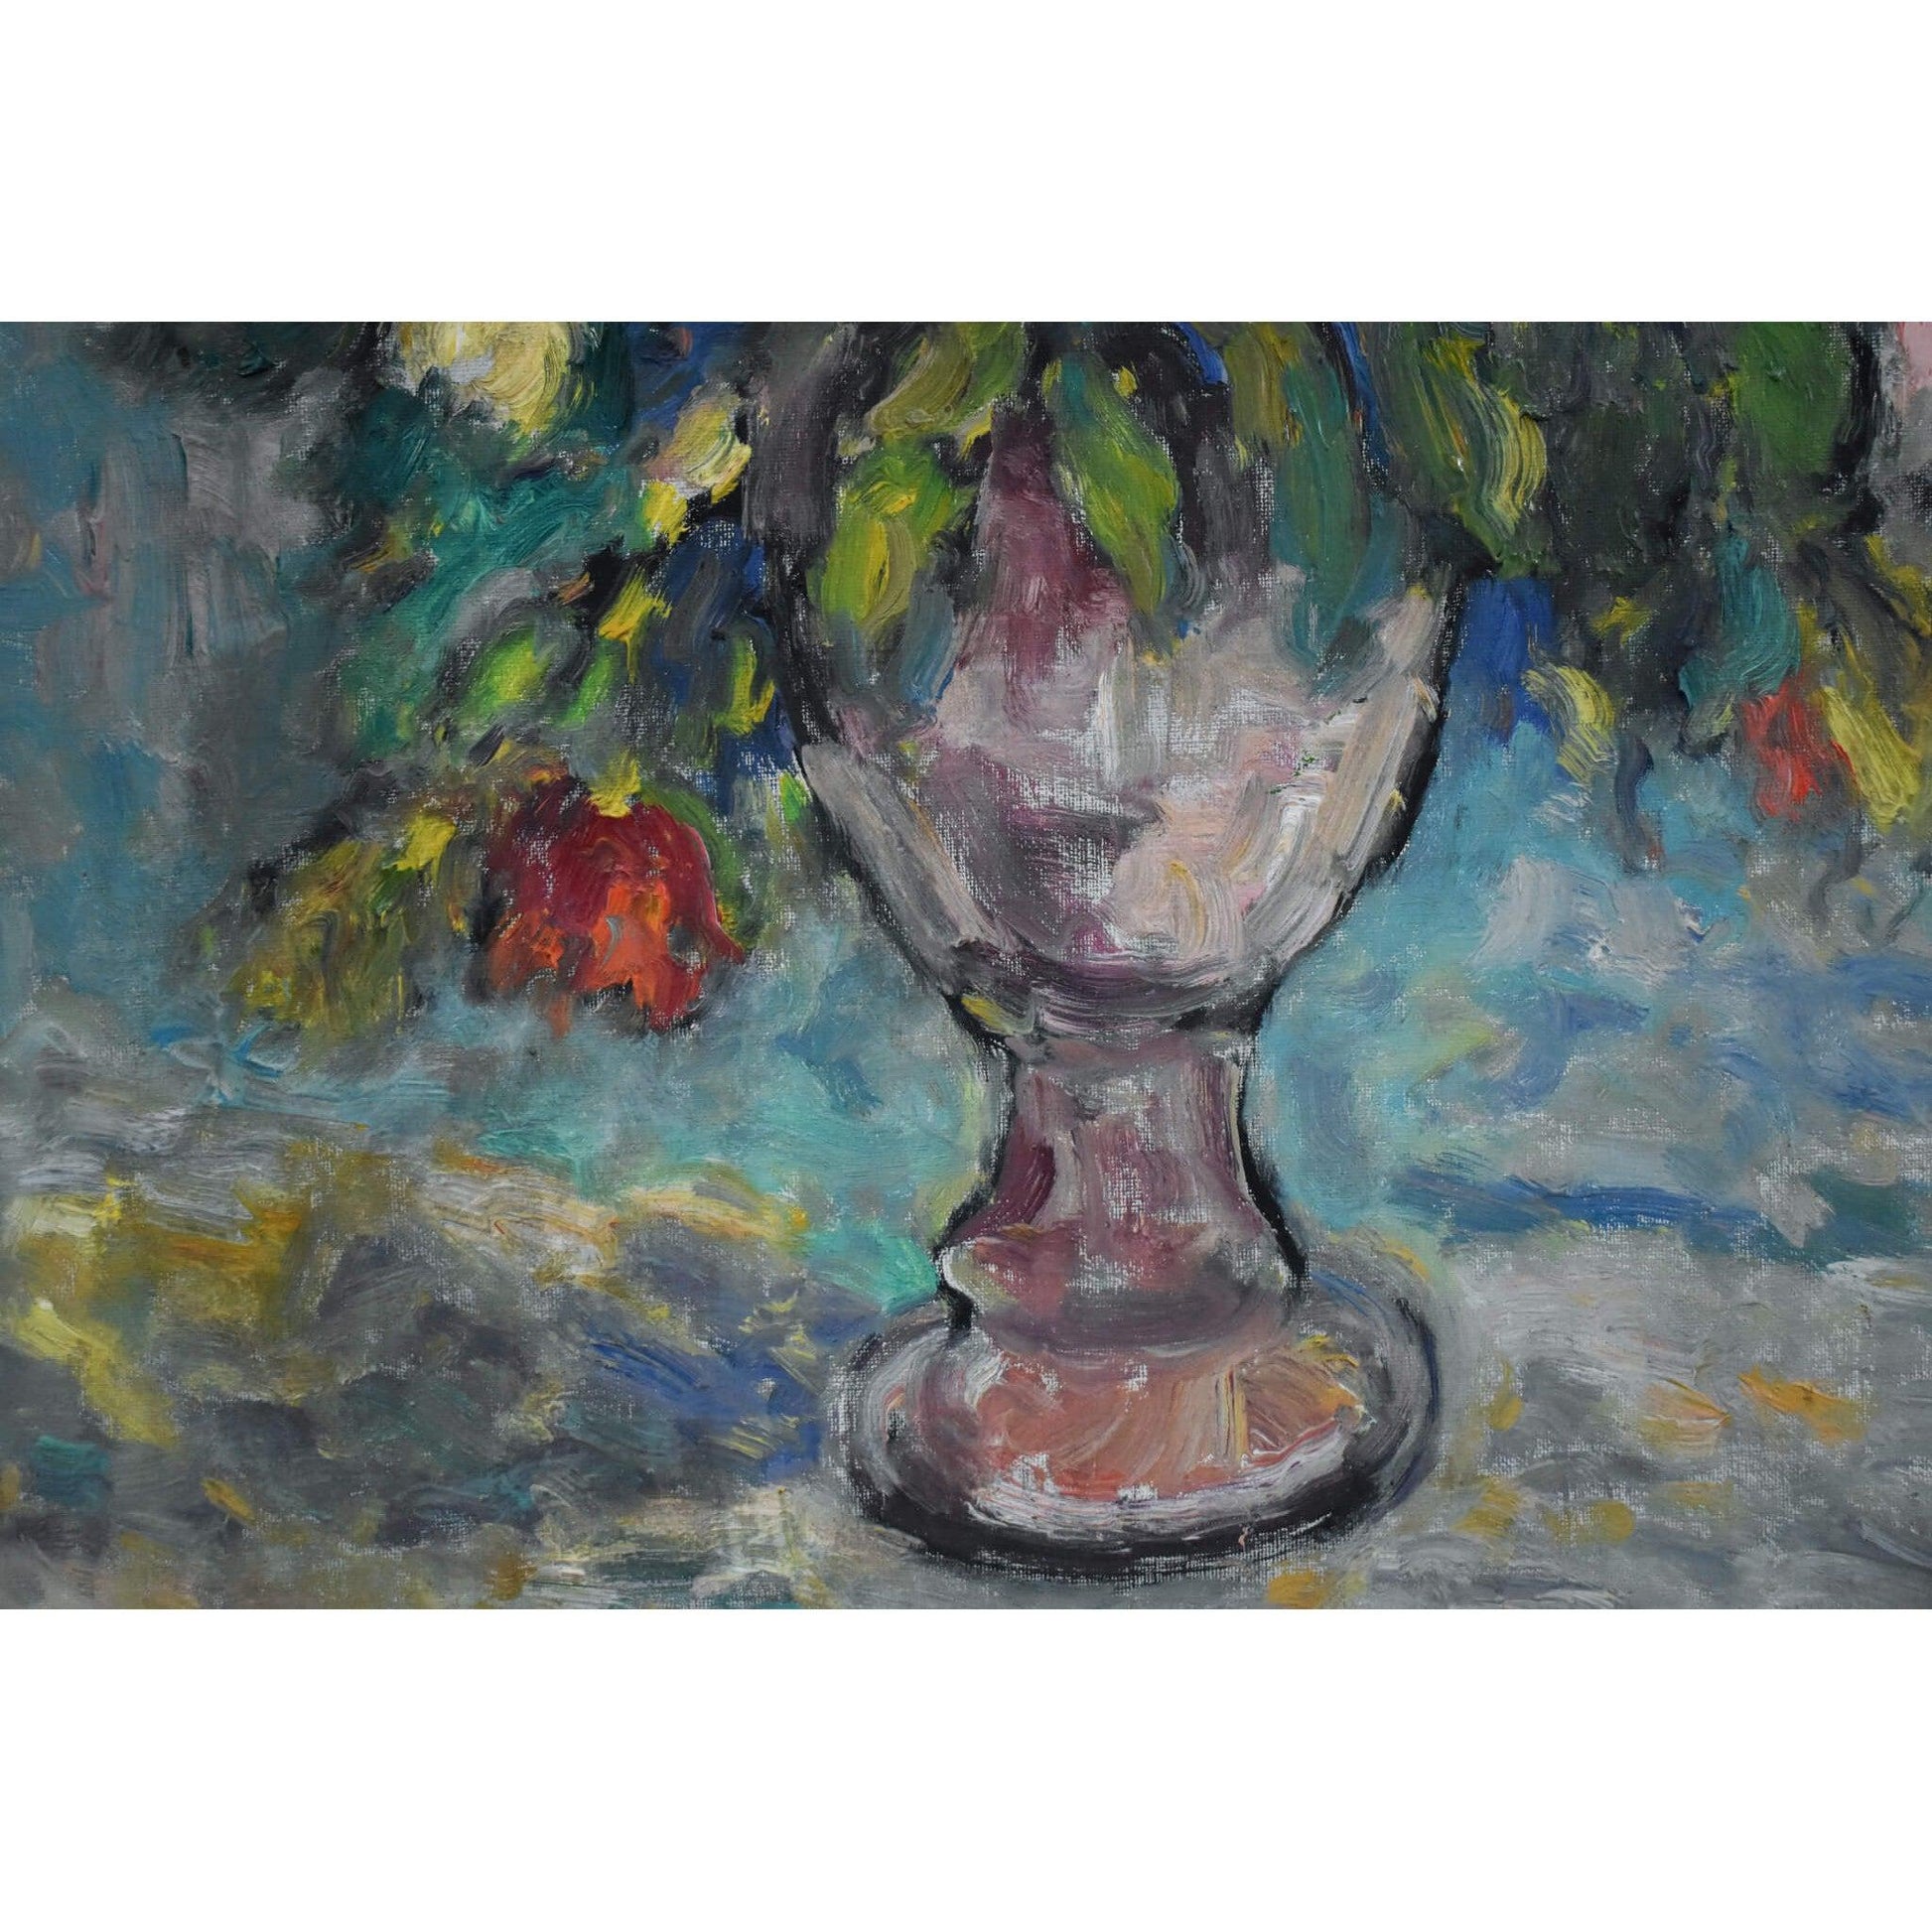 Still life oil painting flowers bouquet vase circa 1950 by Nathan Gutman for sale at Winckelmann Gallery